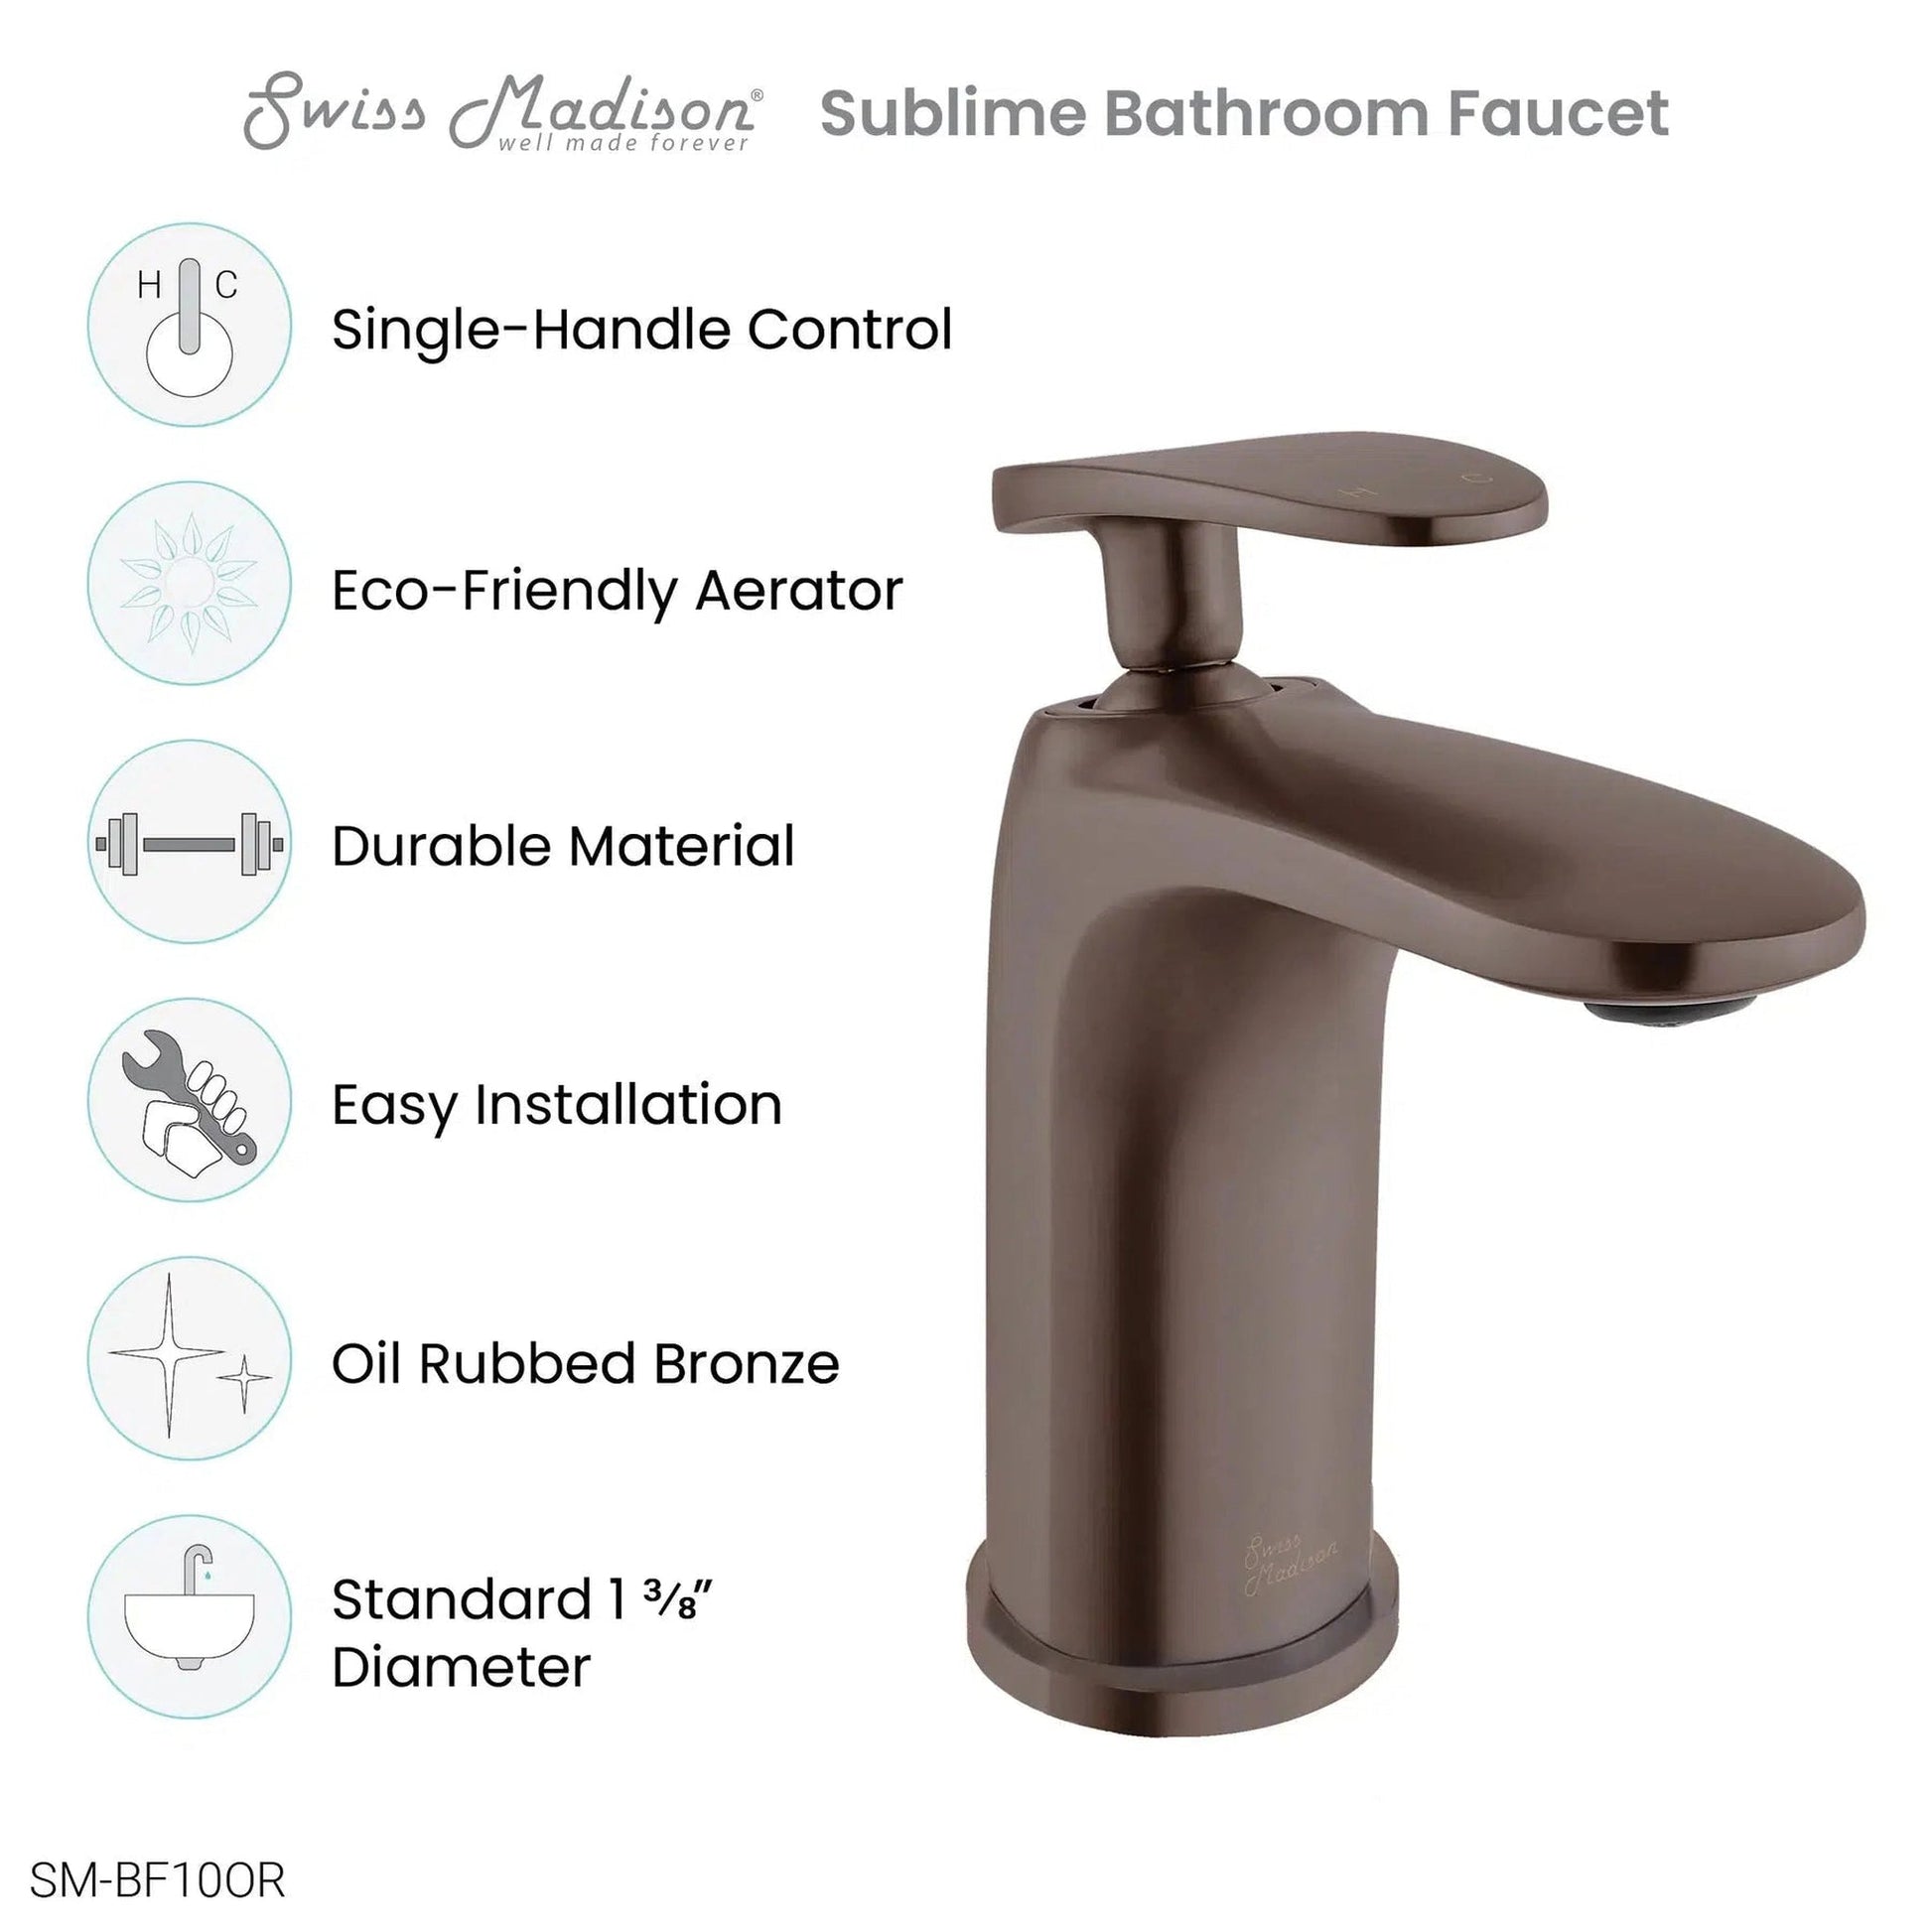 Swiss Madison Sublime 7" Oil Rubbed Bronze Single Hole Bathroom Faucet With Flow Rate of 1.2 GPM